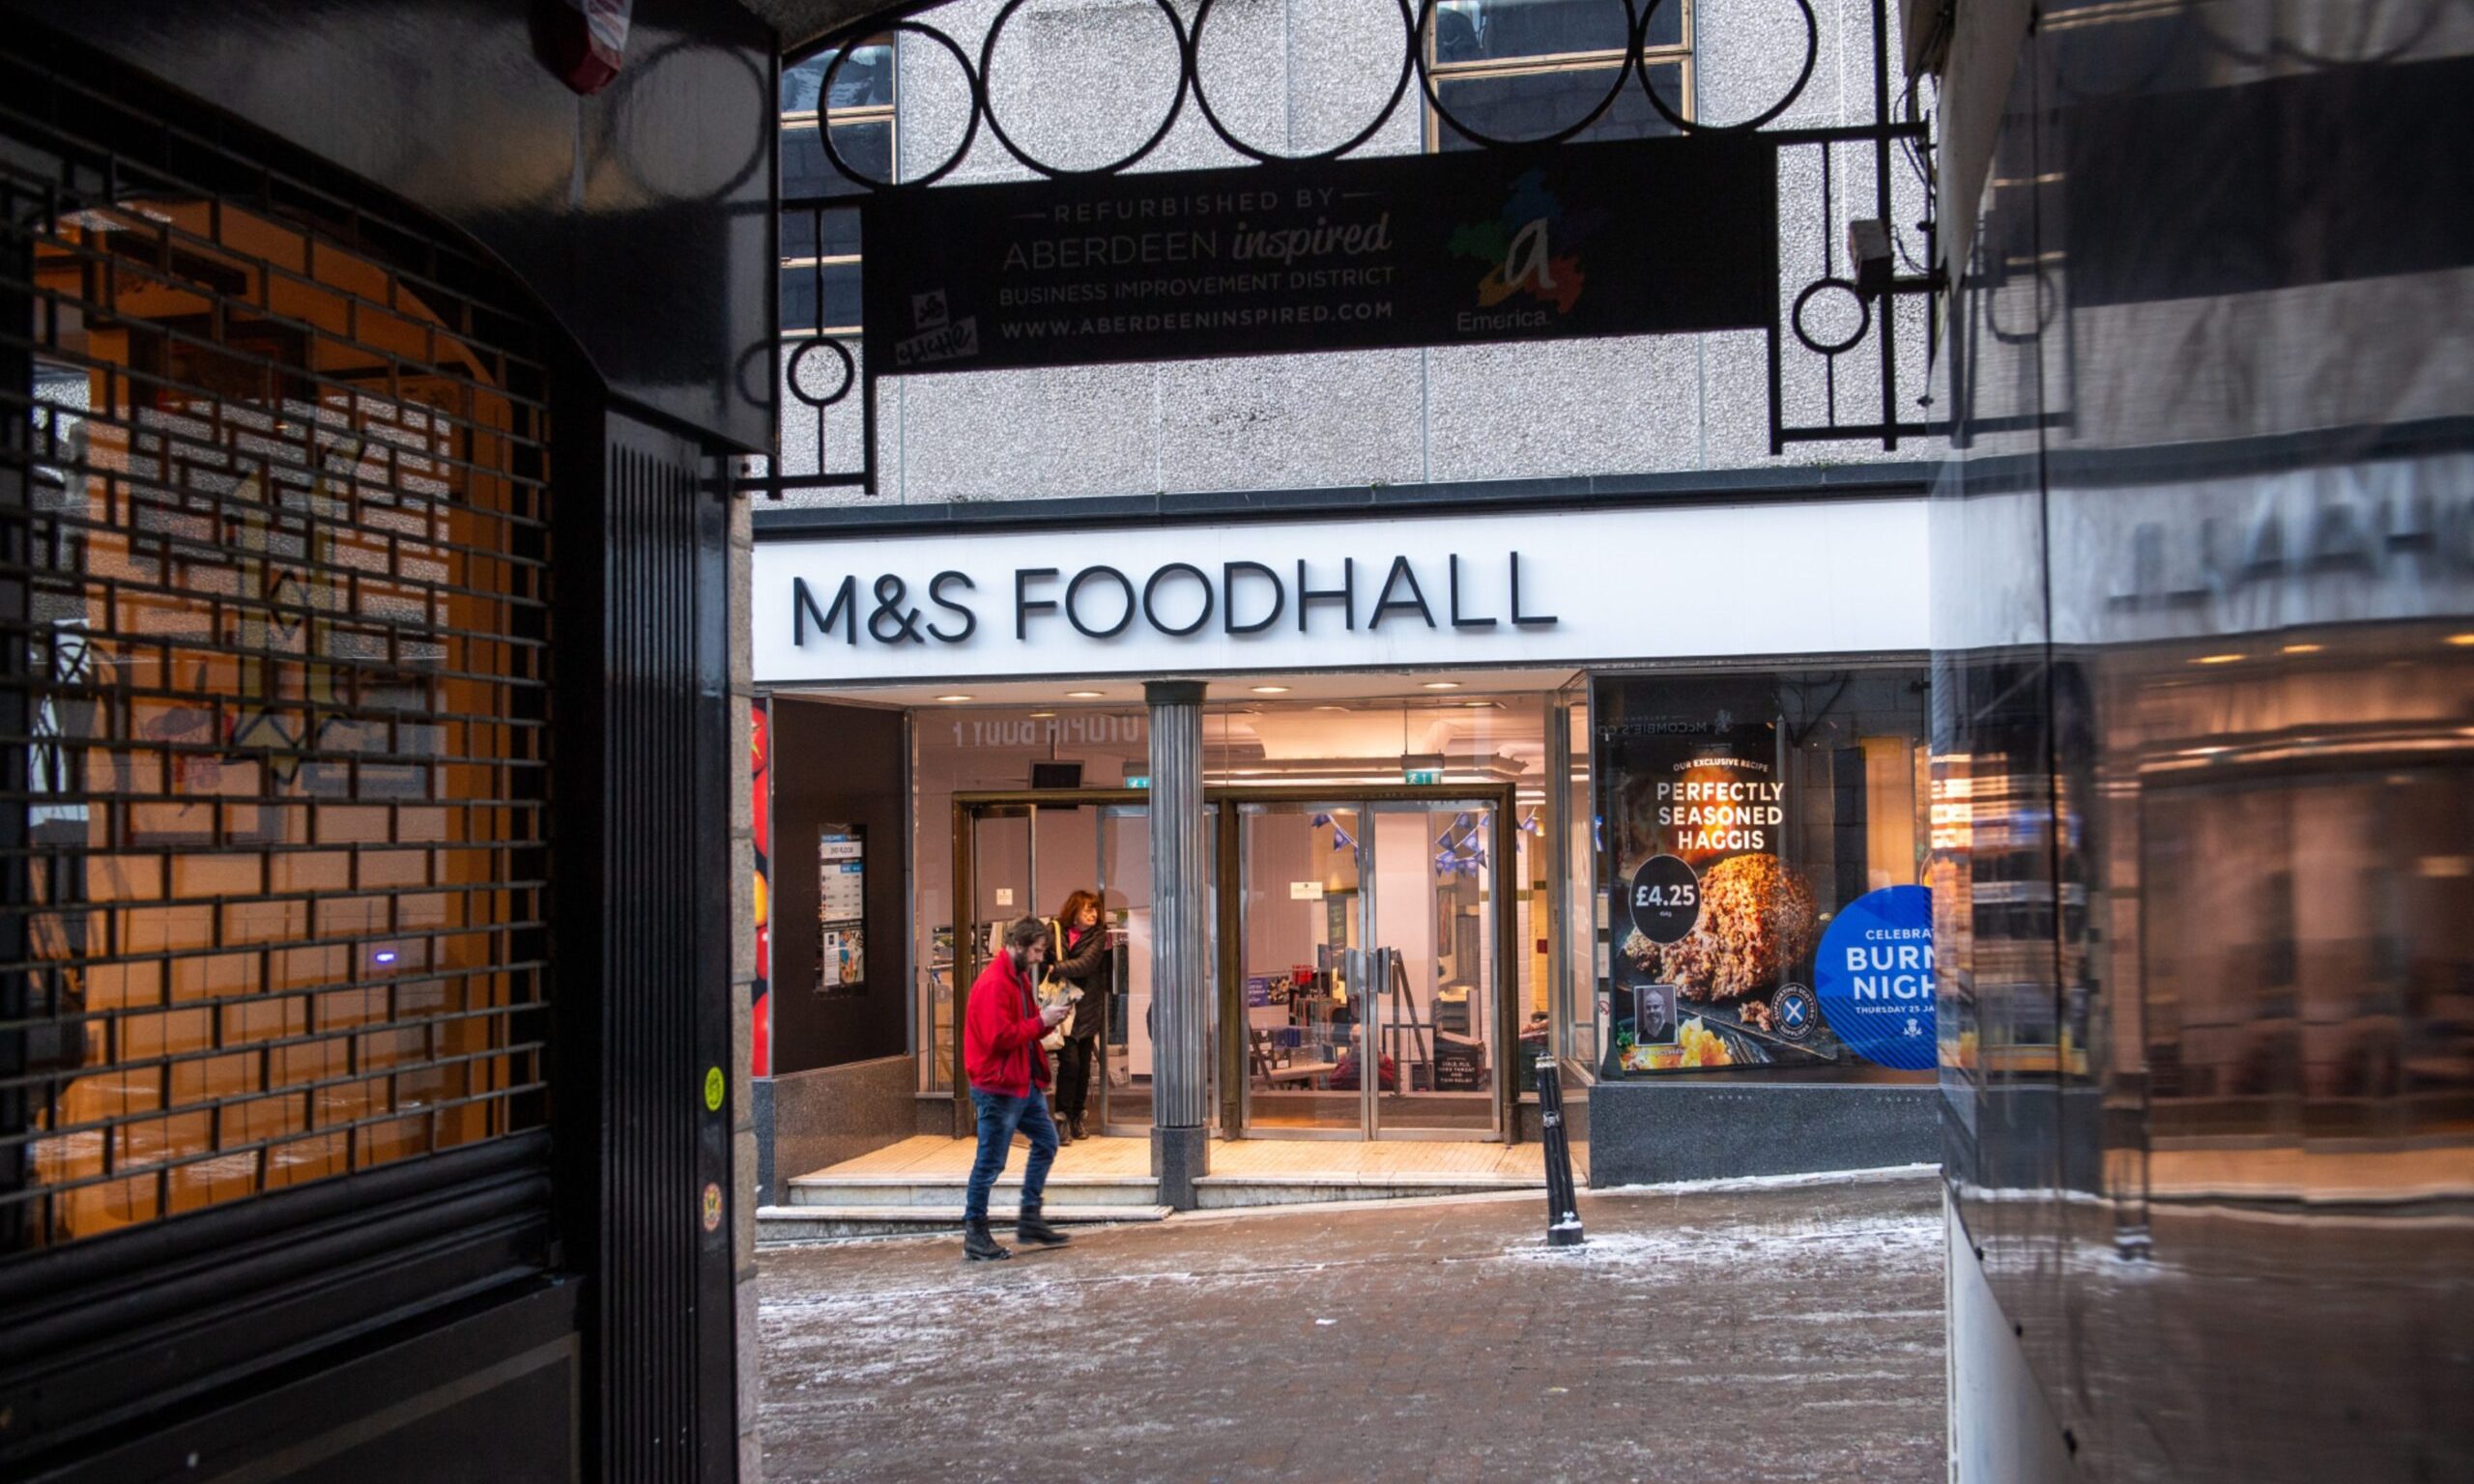 The food hall as seen from McCombie's Court